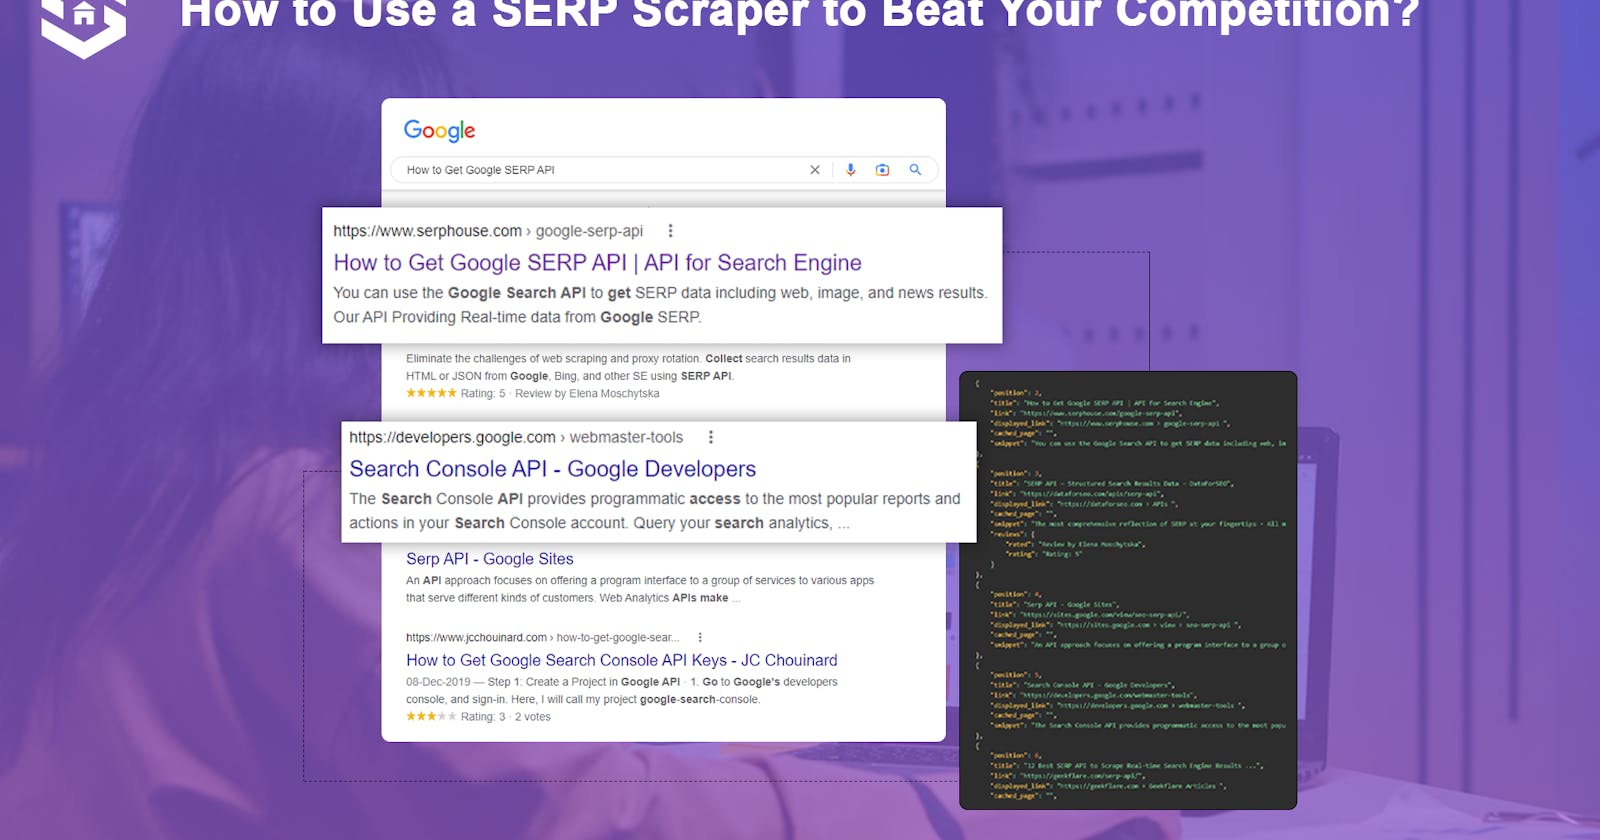 How to Use a SERP Scraper to Beat Your Competition